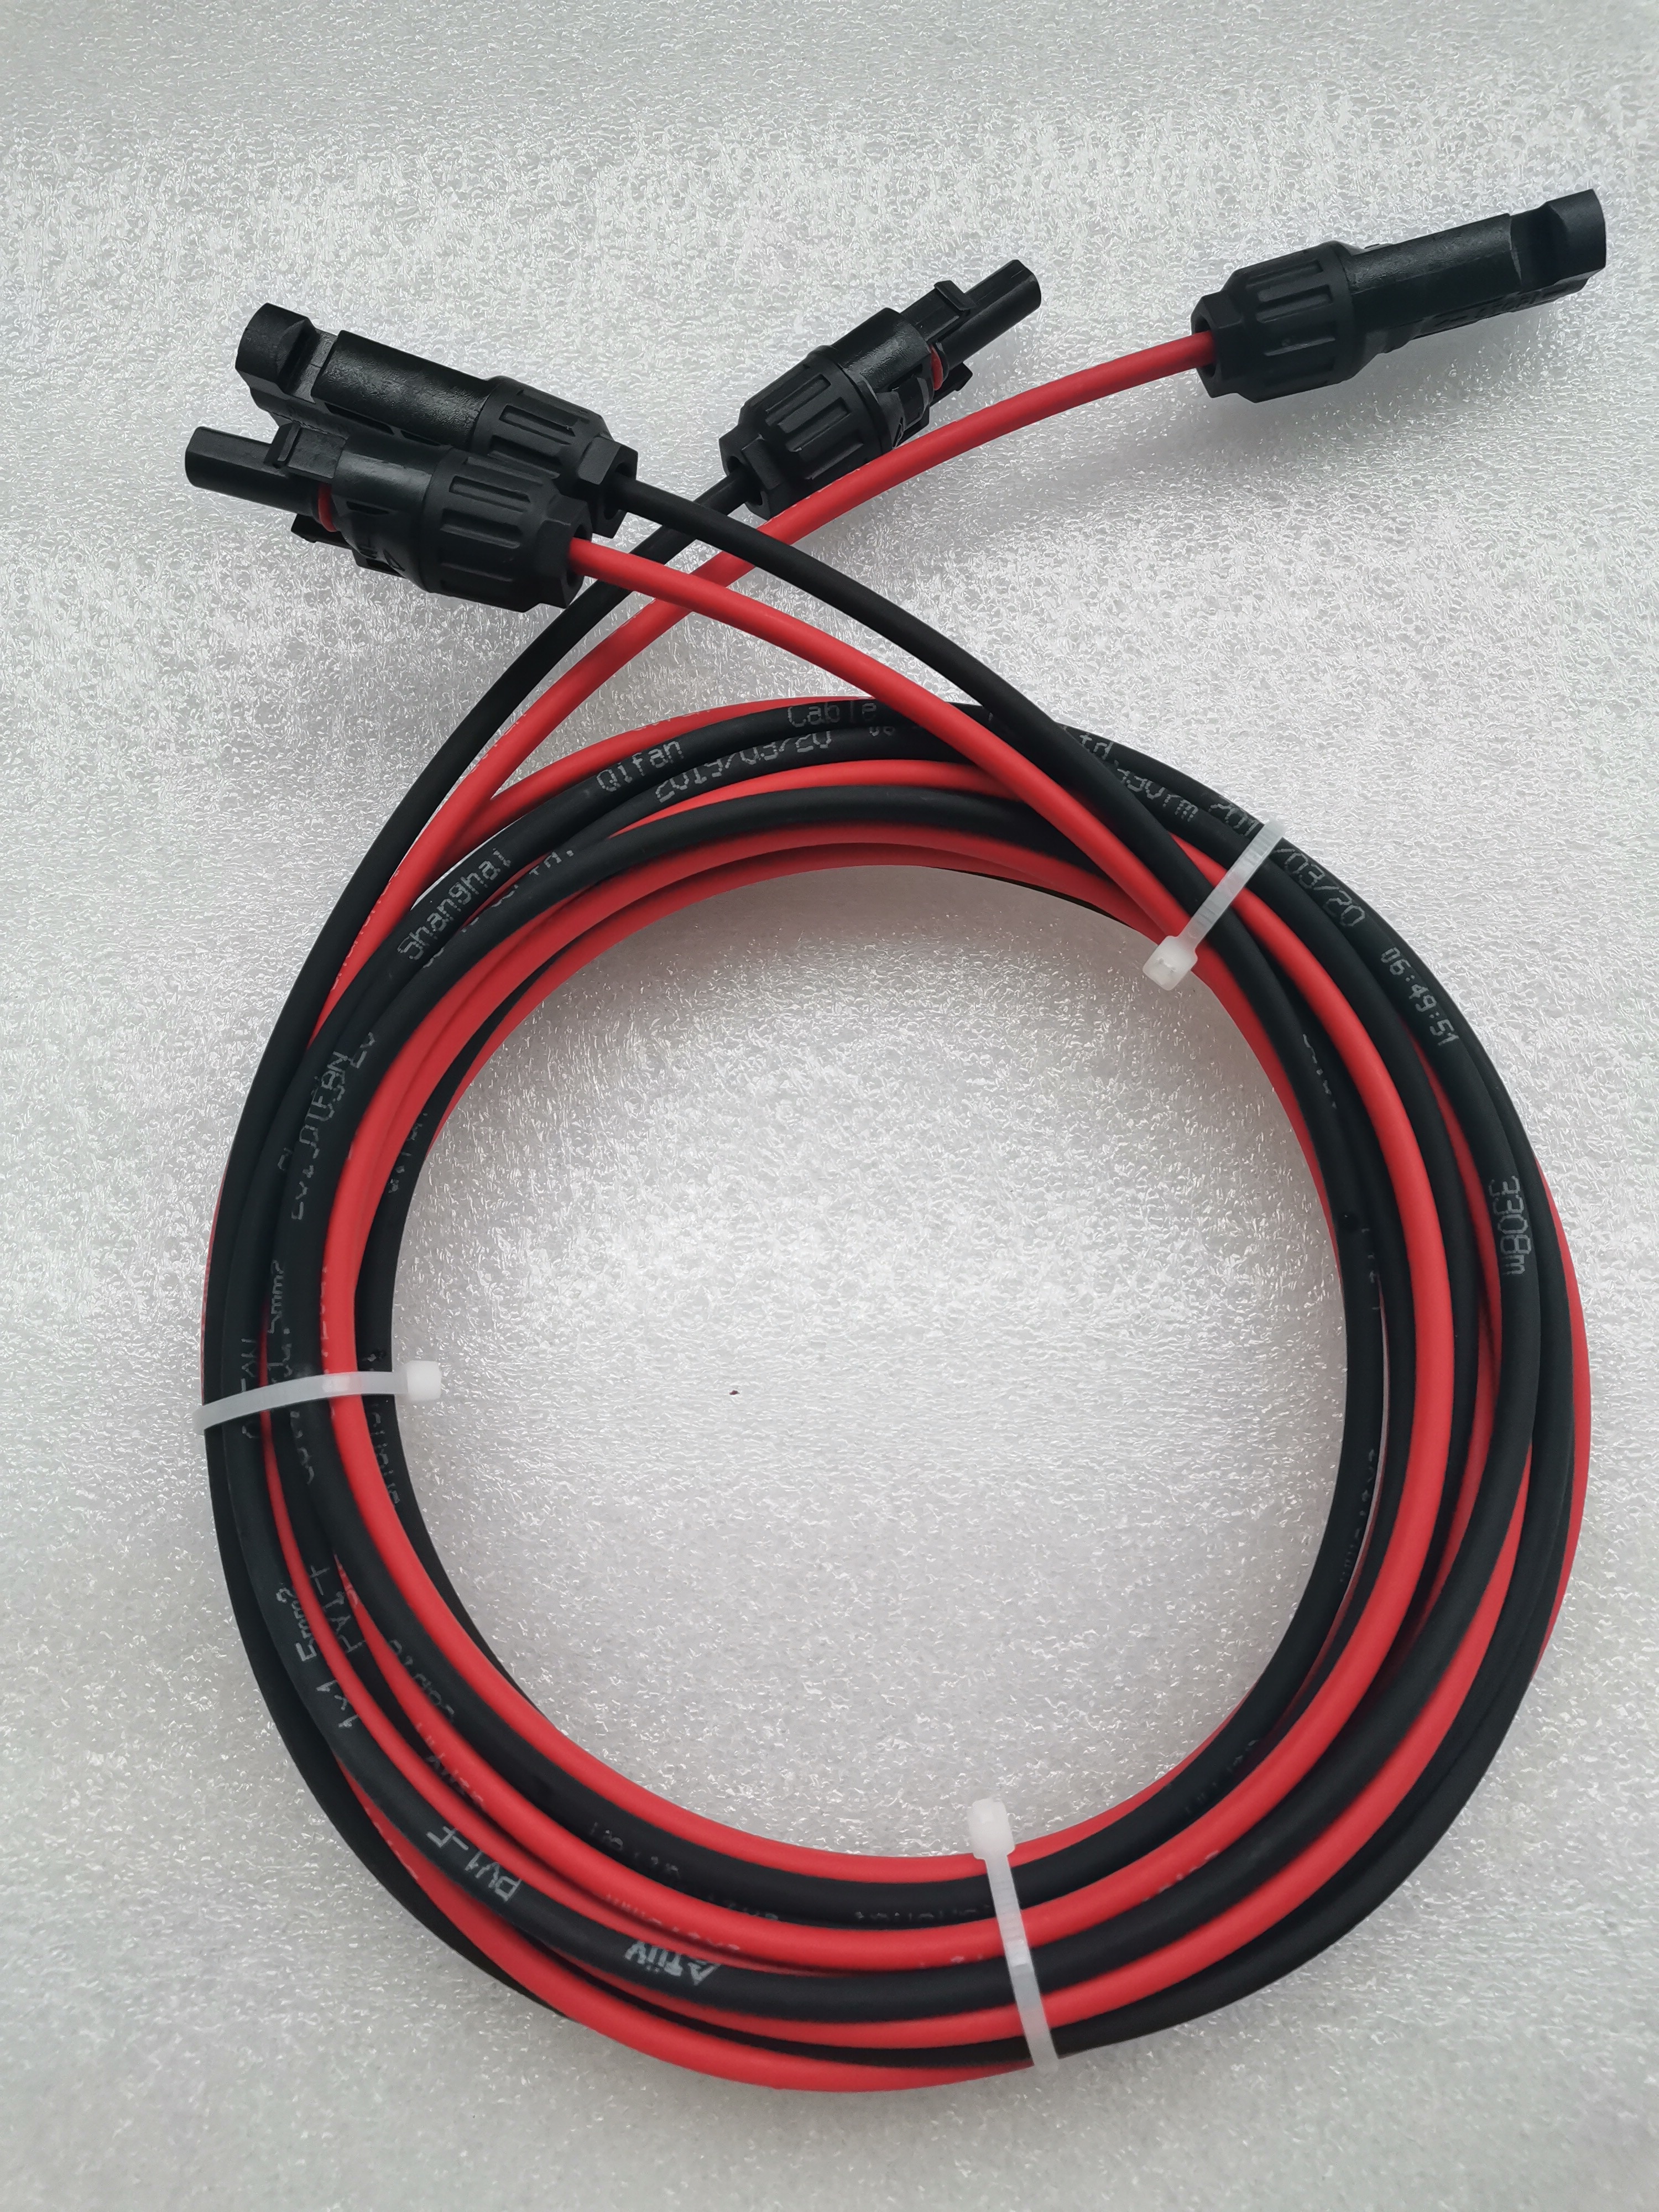 PV solar cable 6/4/2.5mm2 10/12/14 AWG 1-10m long € 15,08